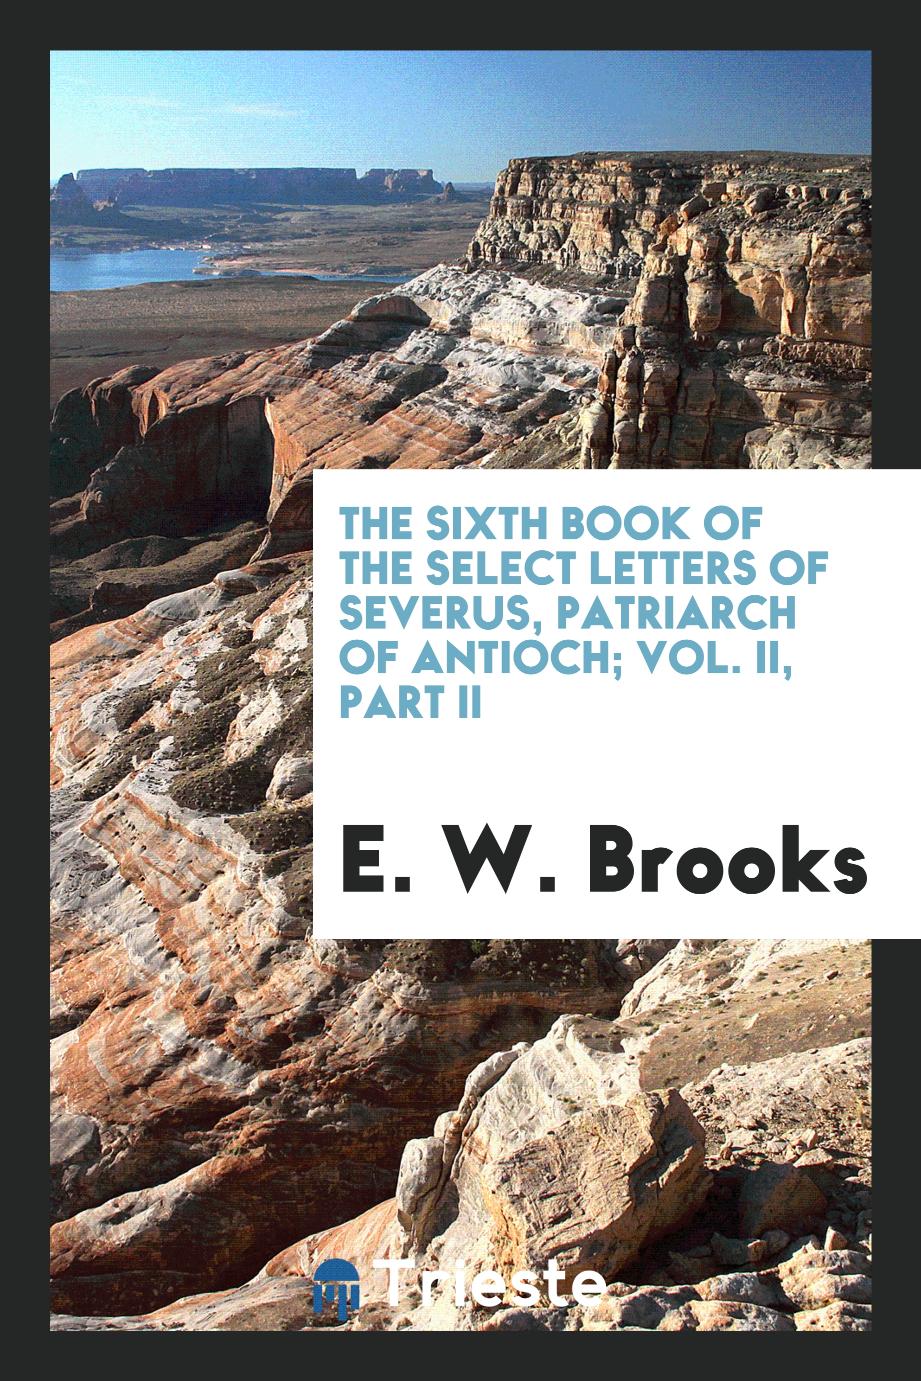 The Sixth book of the Select letters of Severus, Patriarch of Antioch; Vol. II, Part II